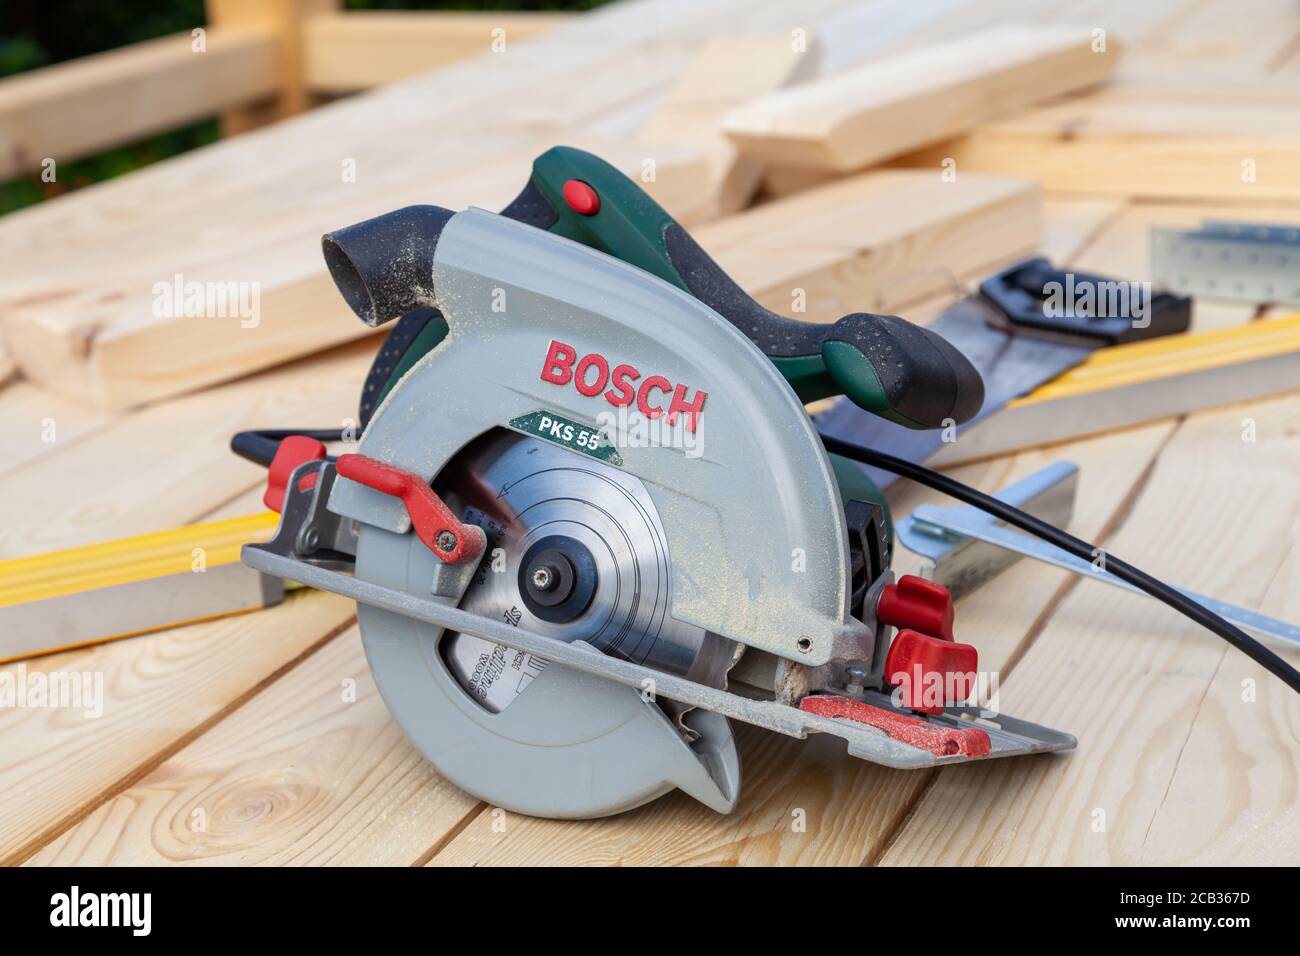 Novosibirsk, Russia - 07.04.20: Close-up of a modern new electric hand saw Bosch PKS 55 with a green plastic case and a metal blade on a wooden d Stock Photo - Alamy